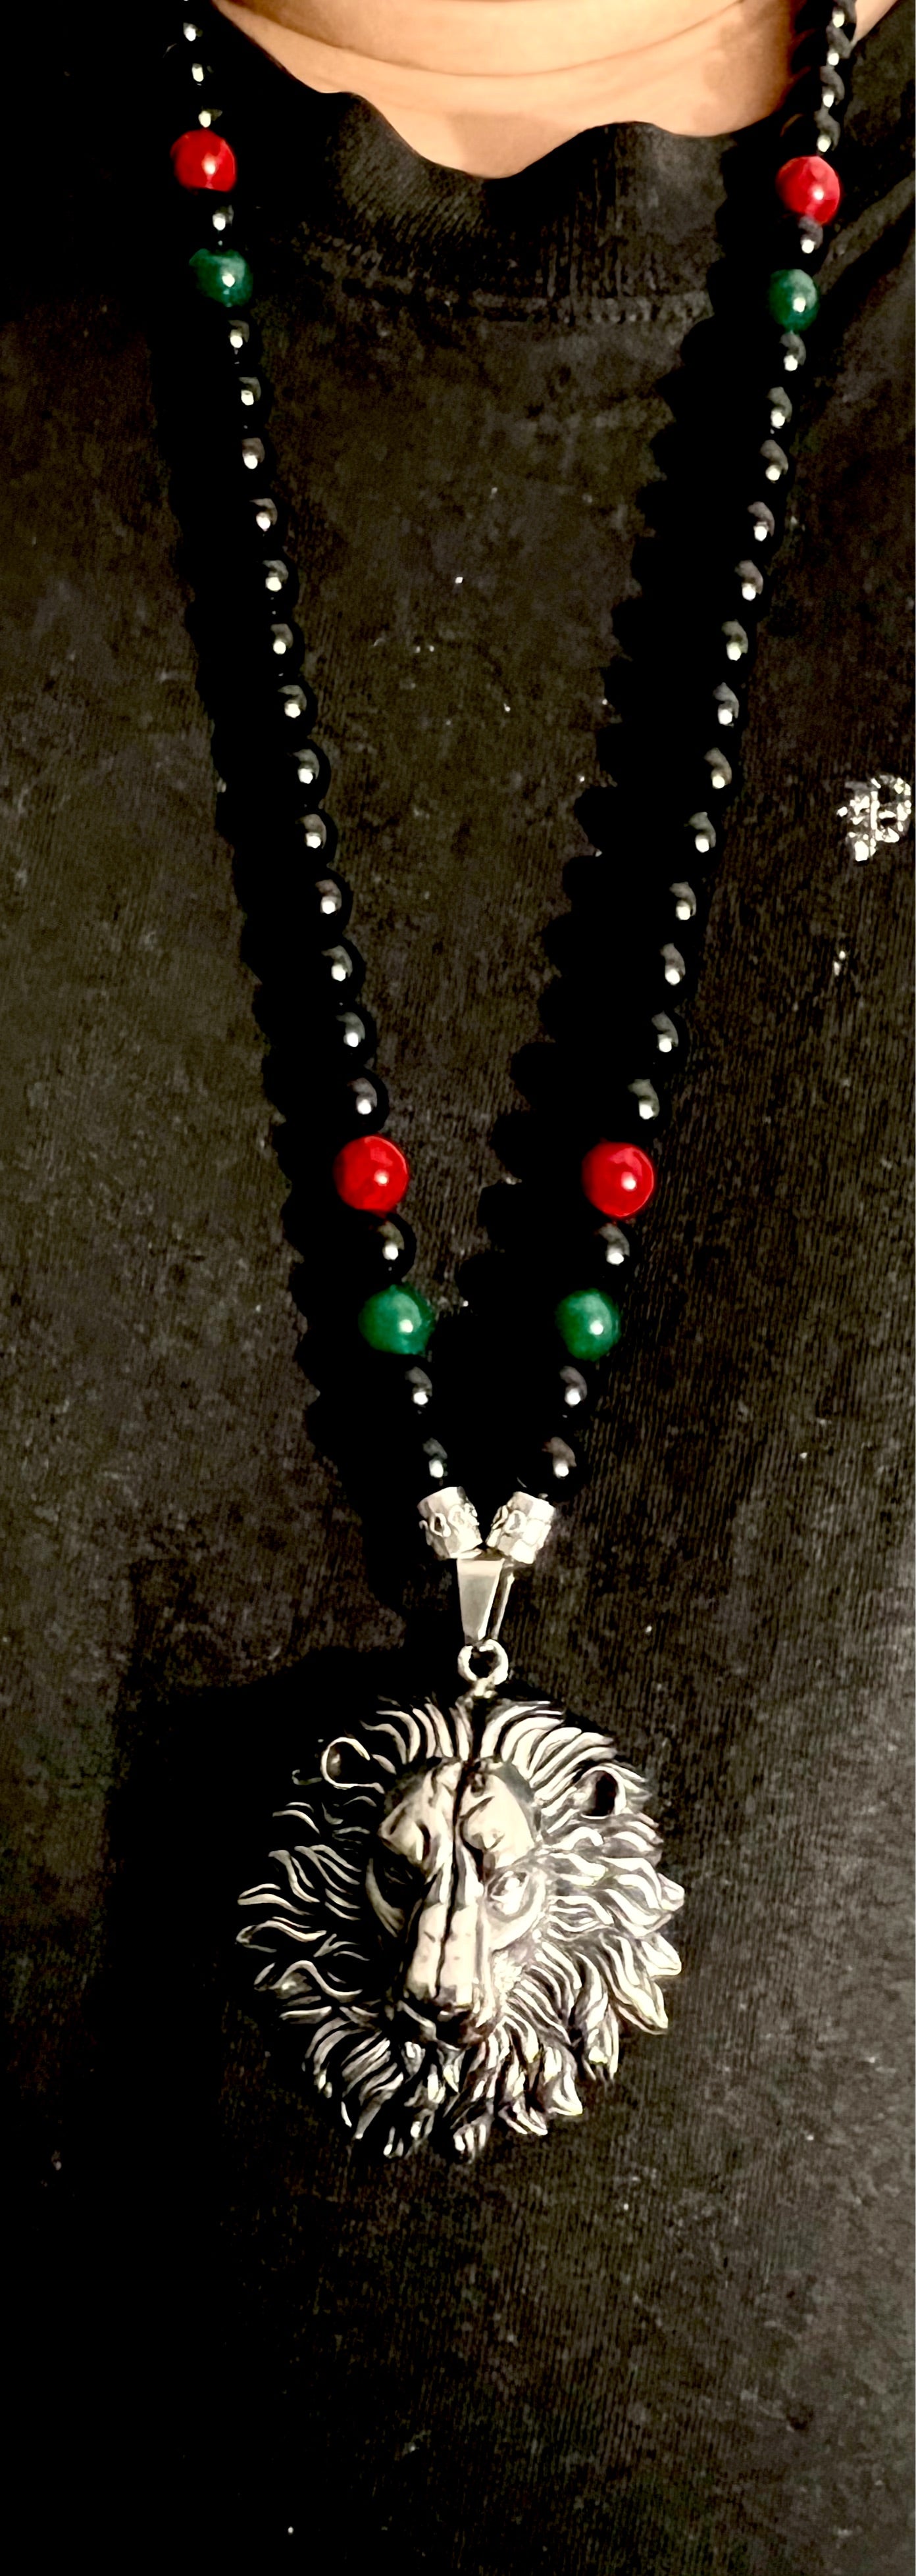 Onyx,Green Agate Lion Head 32” Necklace